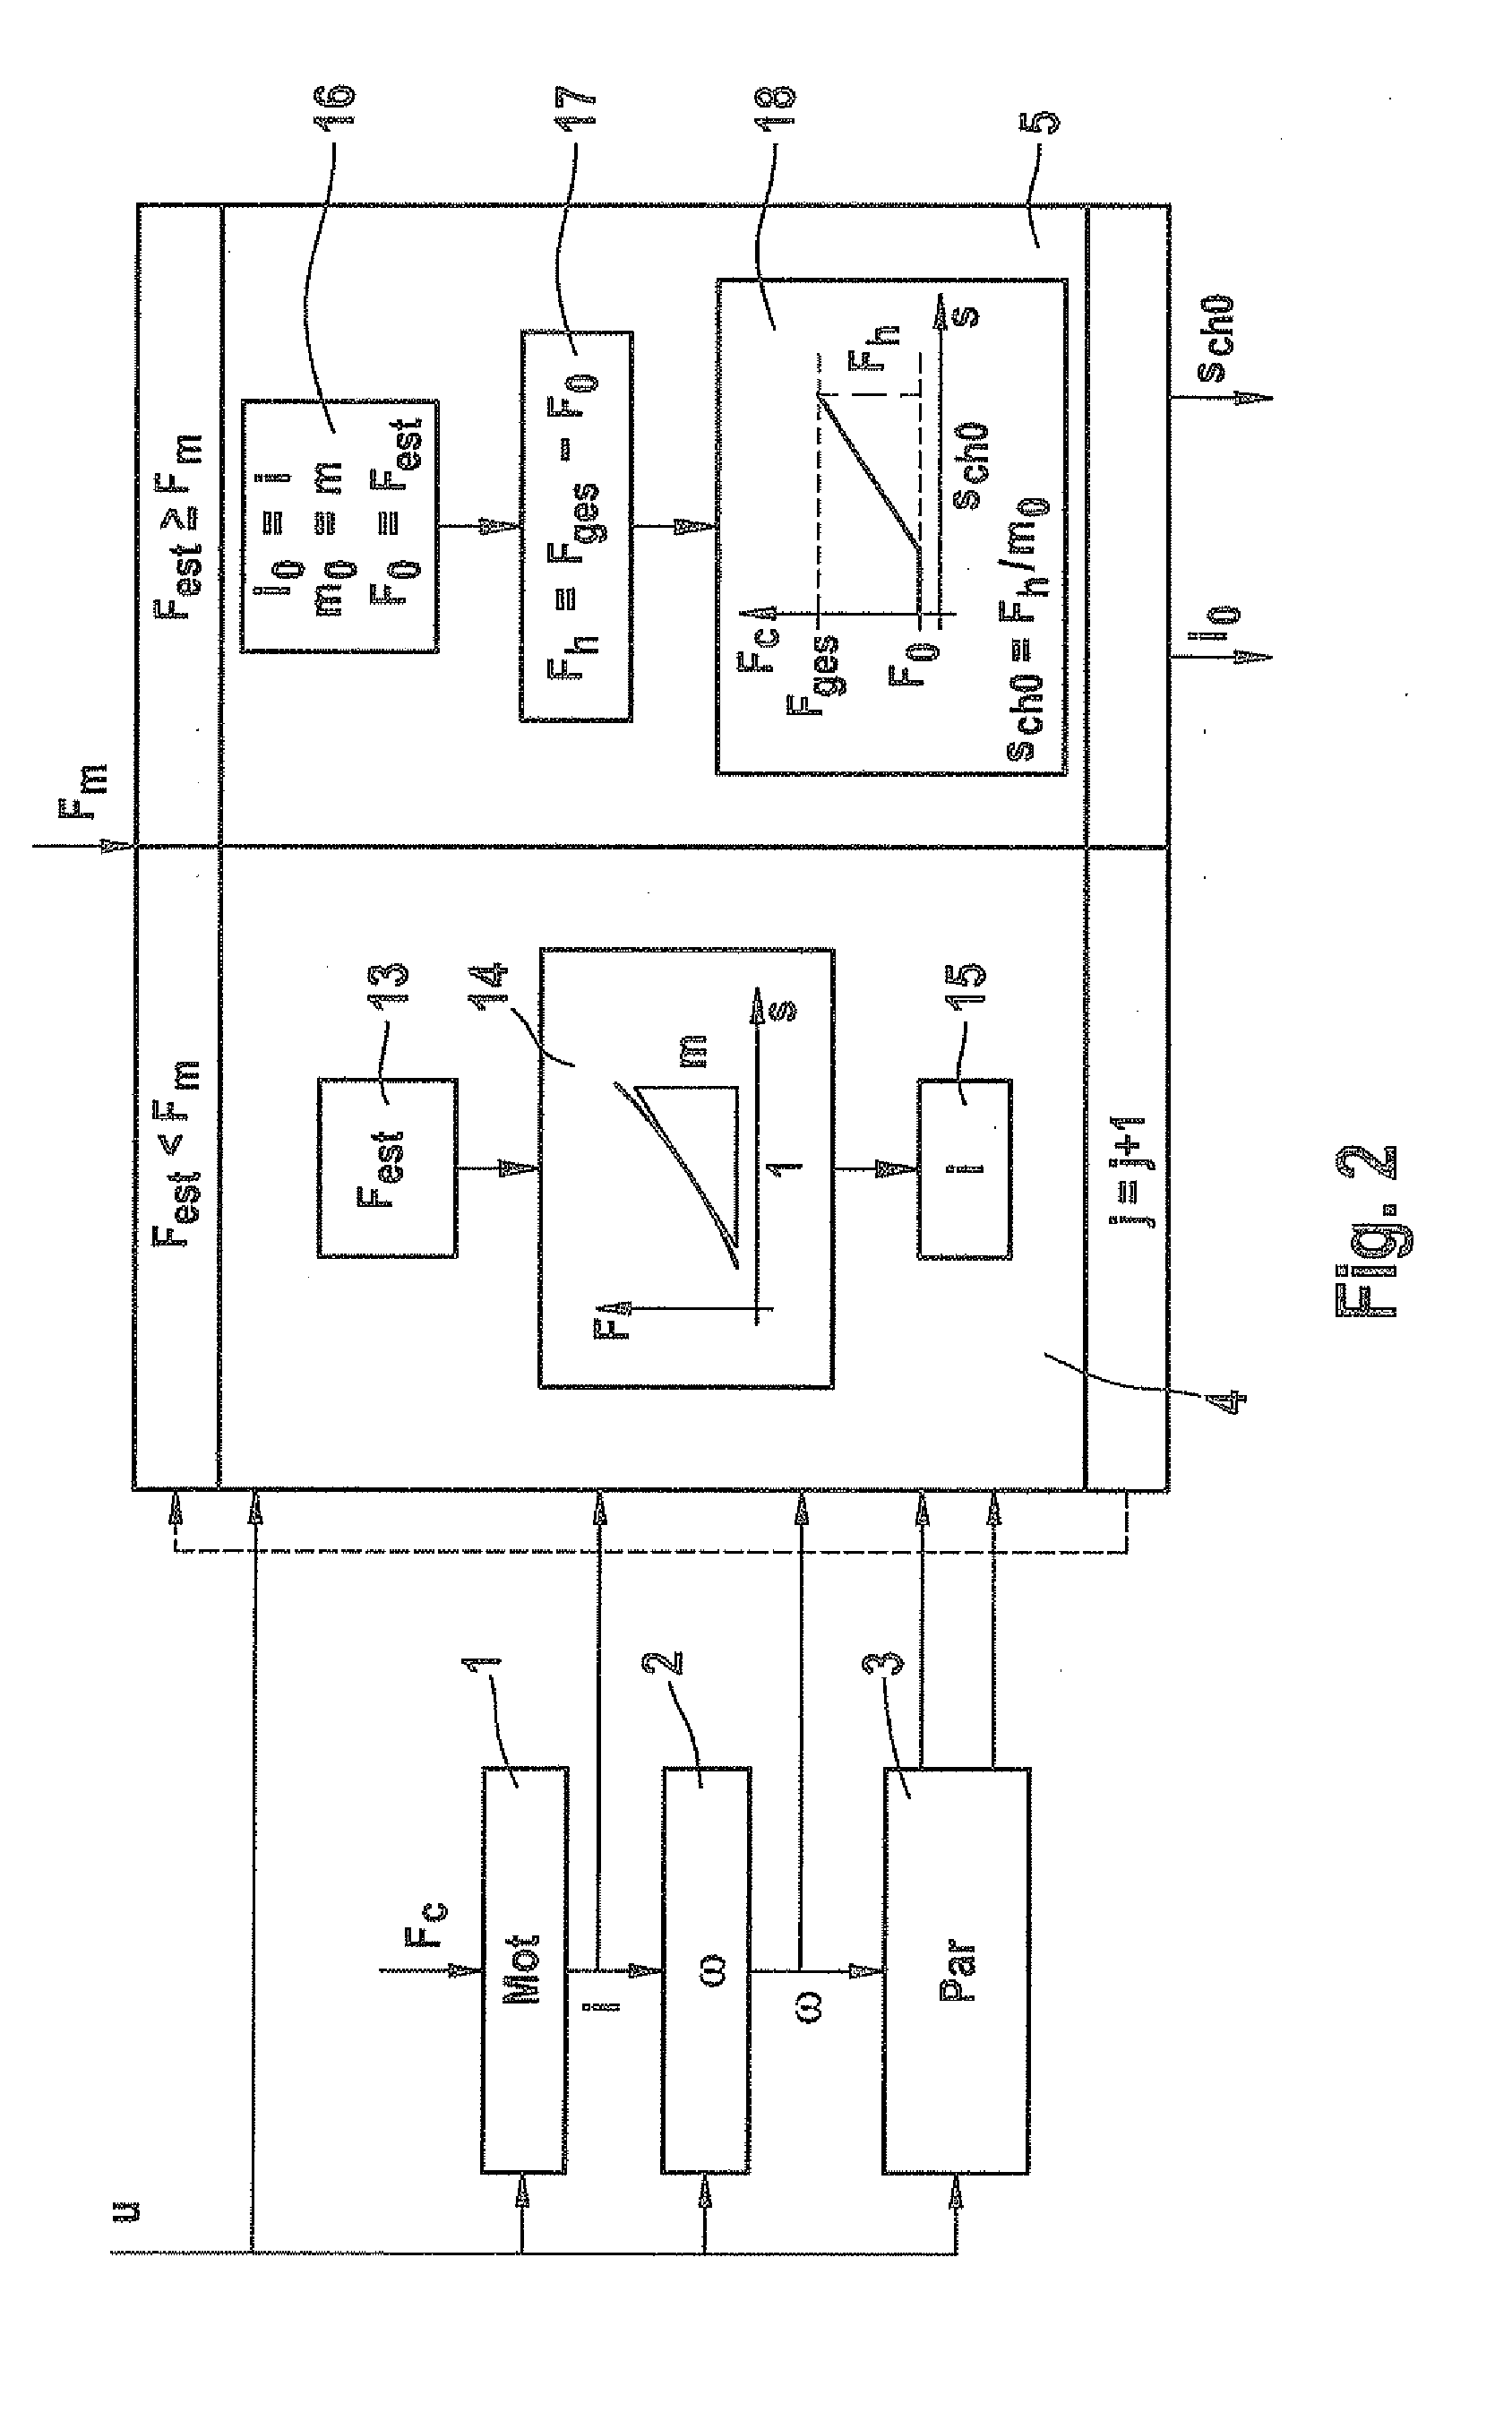 Method for setting the clamping force of a hydraulically supported electric motor-driven parking brake